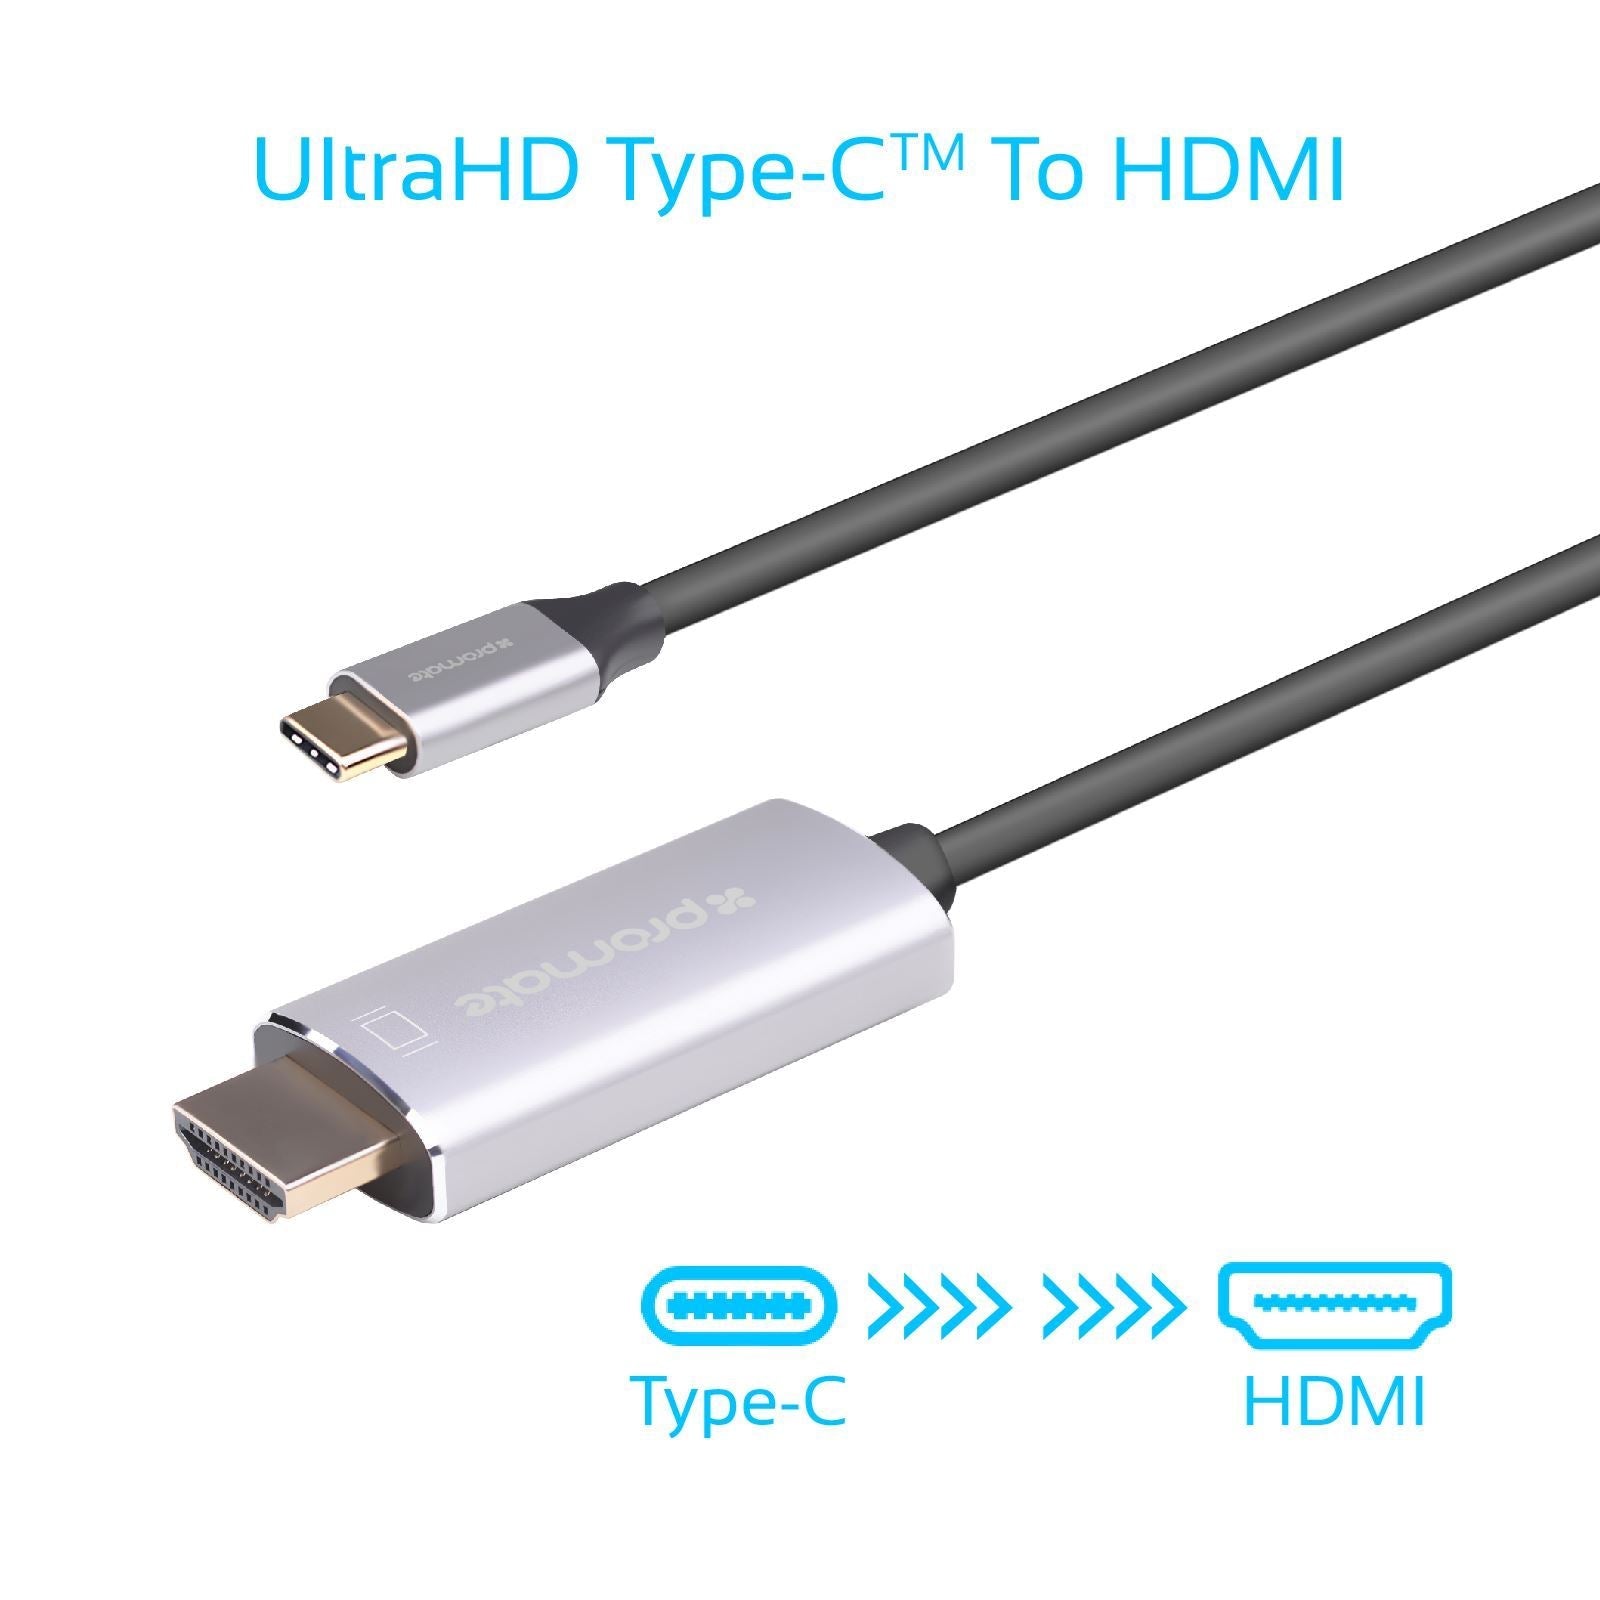 PROMATE_1.8m_4K_USB-C_to_HDMI_Cable_with_Gold_Plated_Connectors._Supports_Max_Res_up_to_4K@60Hz_(4096X2160)._Plug_&_Play._Grey_Colour. 1346